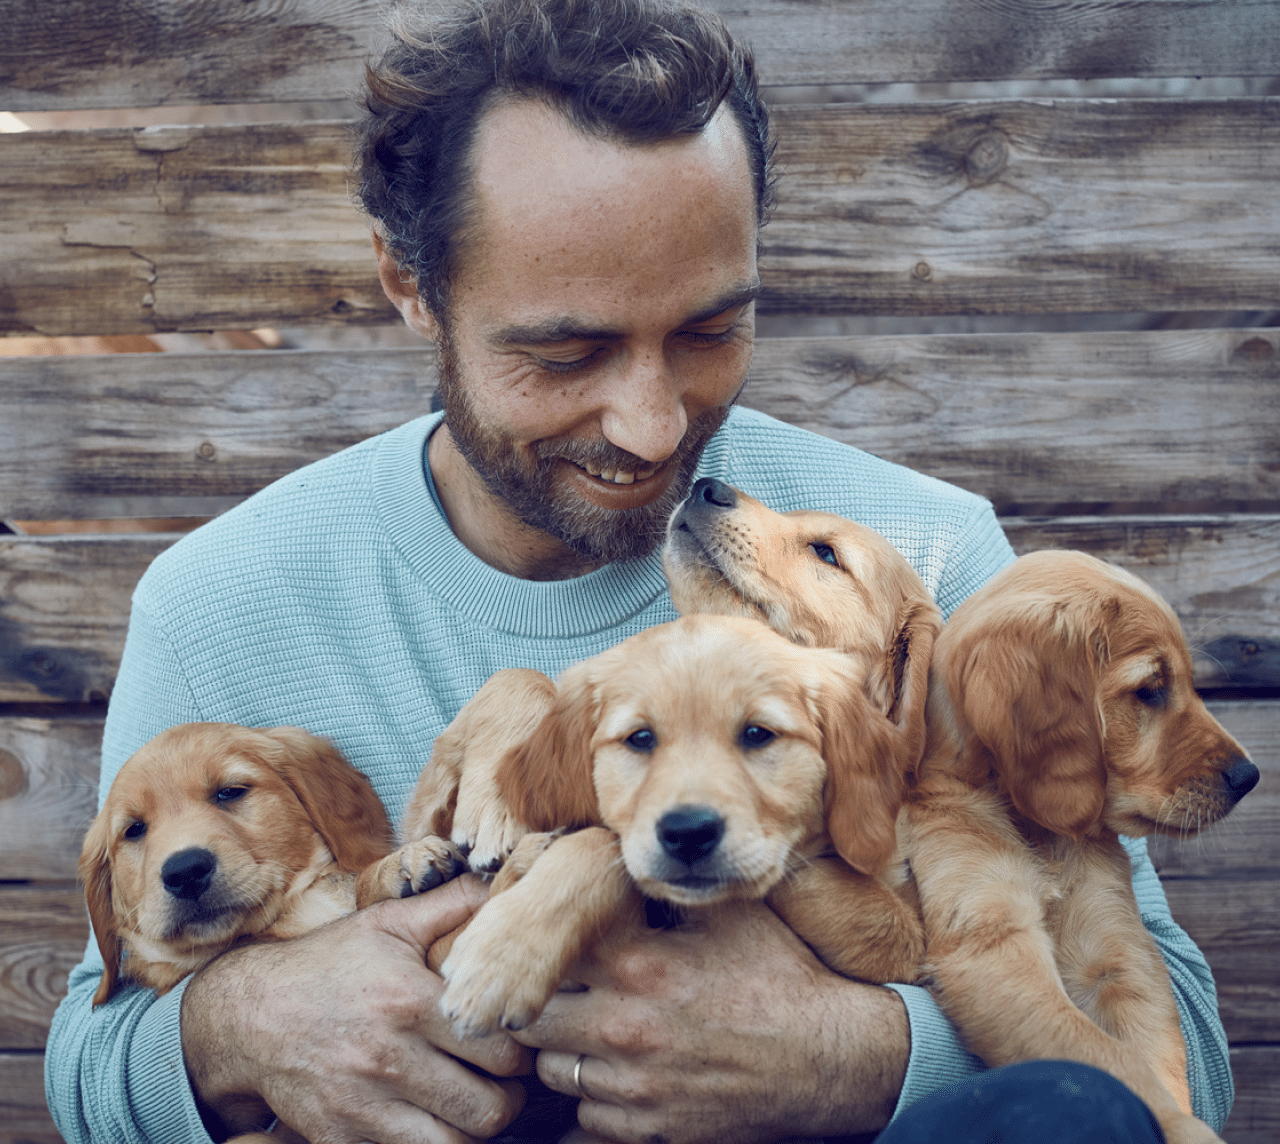 James Middleton holding 4 golden retriever puppies and looking down smiling at them